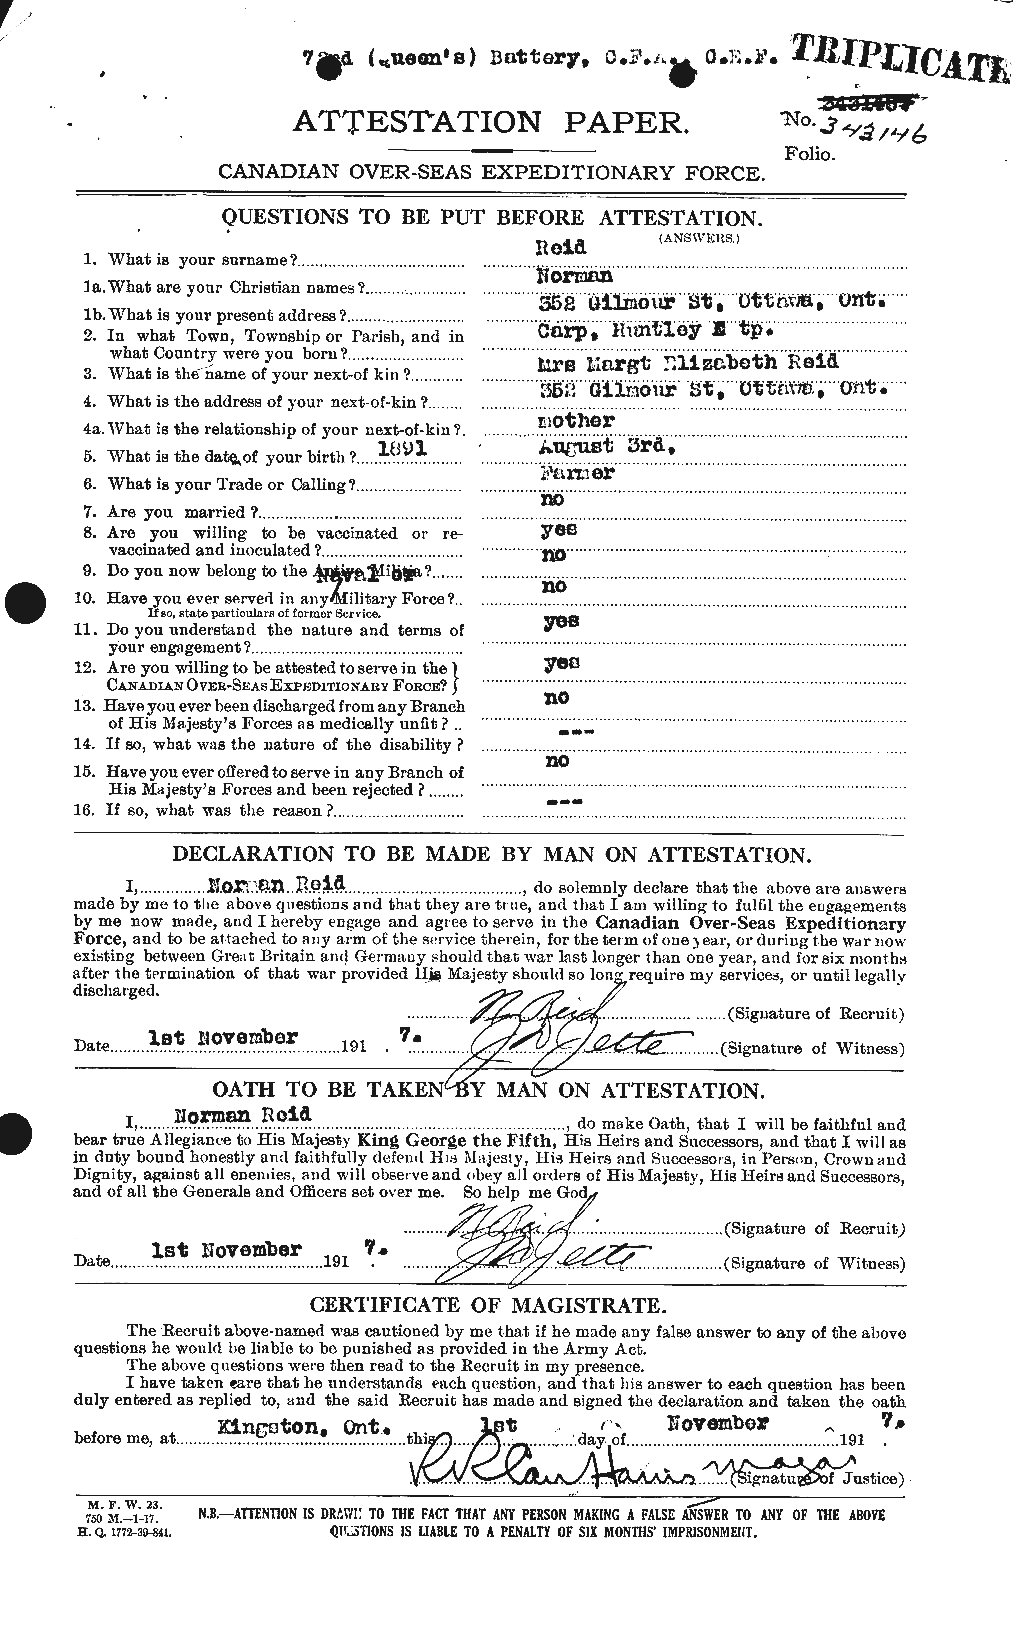 Personnel Records of the First World War - CEF 598962a